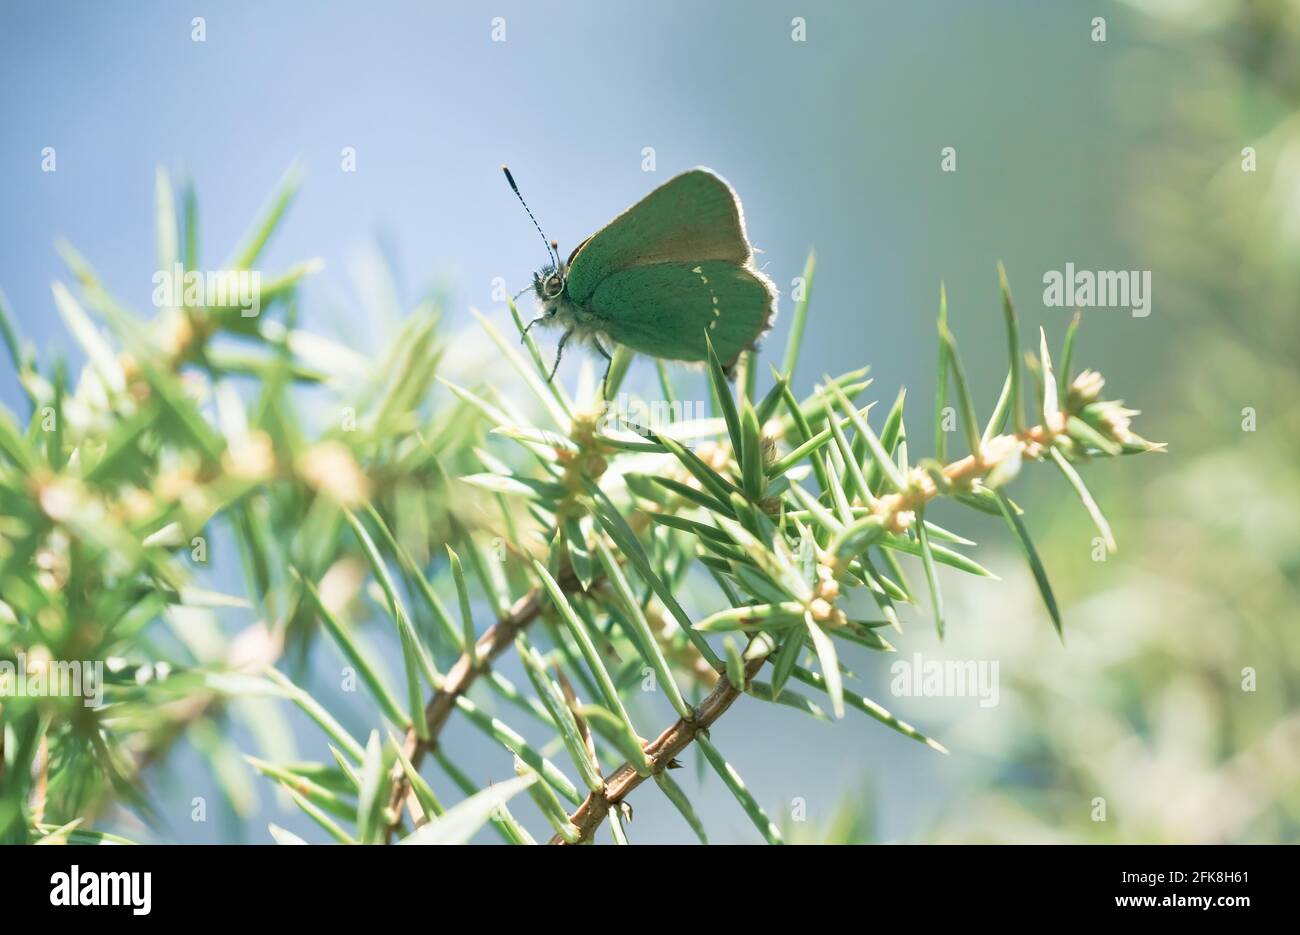 Happy springtime scene with close up of green hairstreak butterfly in a evergreen forest on a juniper bush, Tirol, Austria Stock Photo